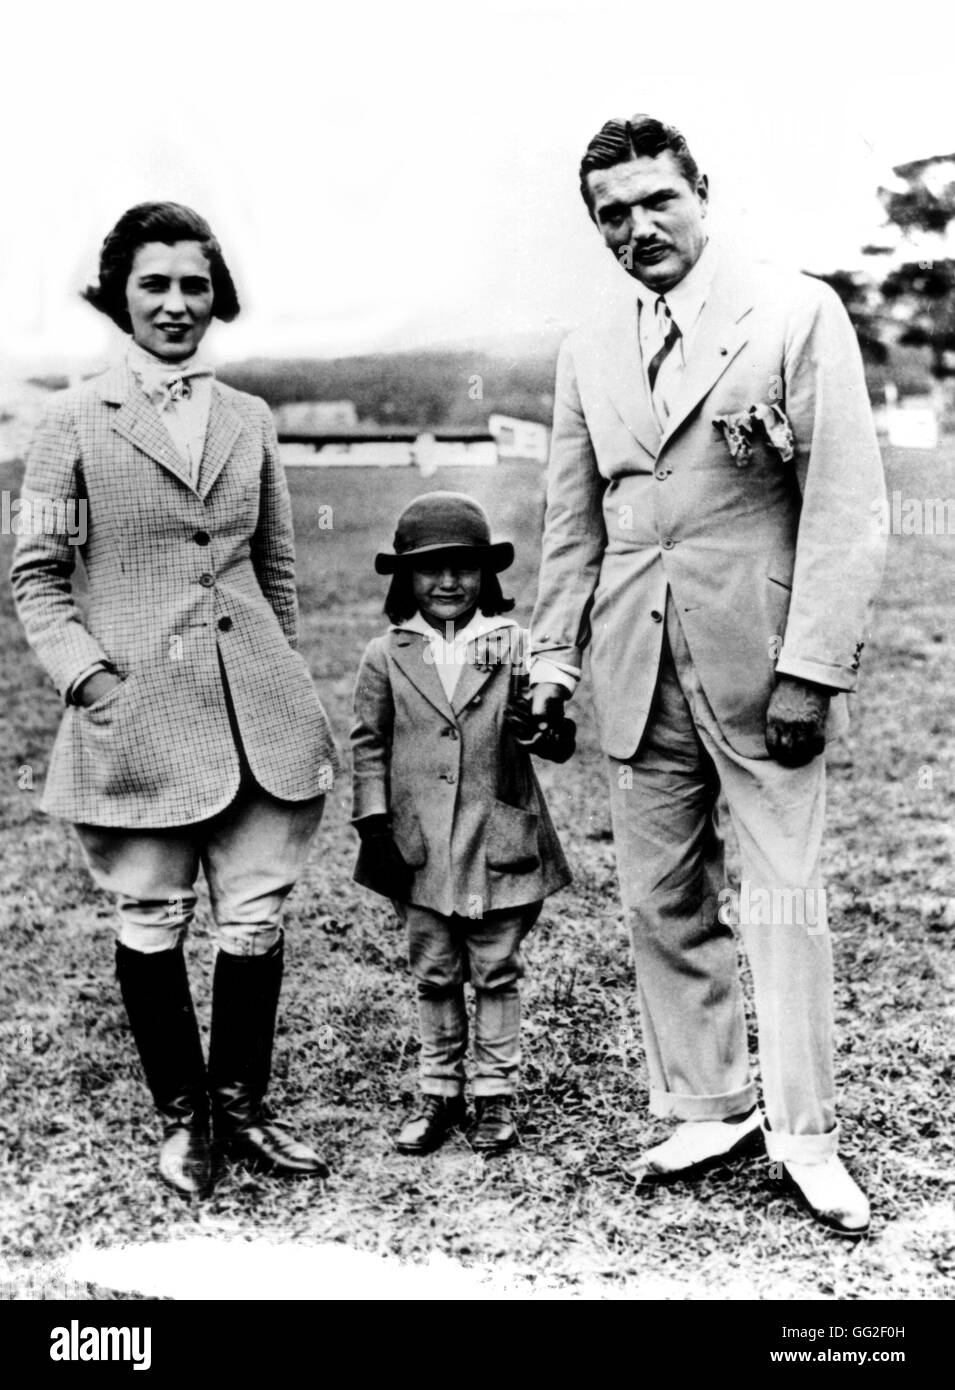 Jacqueline Bouvier-Kennedy, aged 5, between his father and his mother, during a horse race 1934 United States Stock Photo